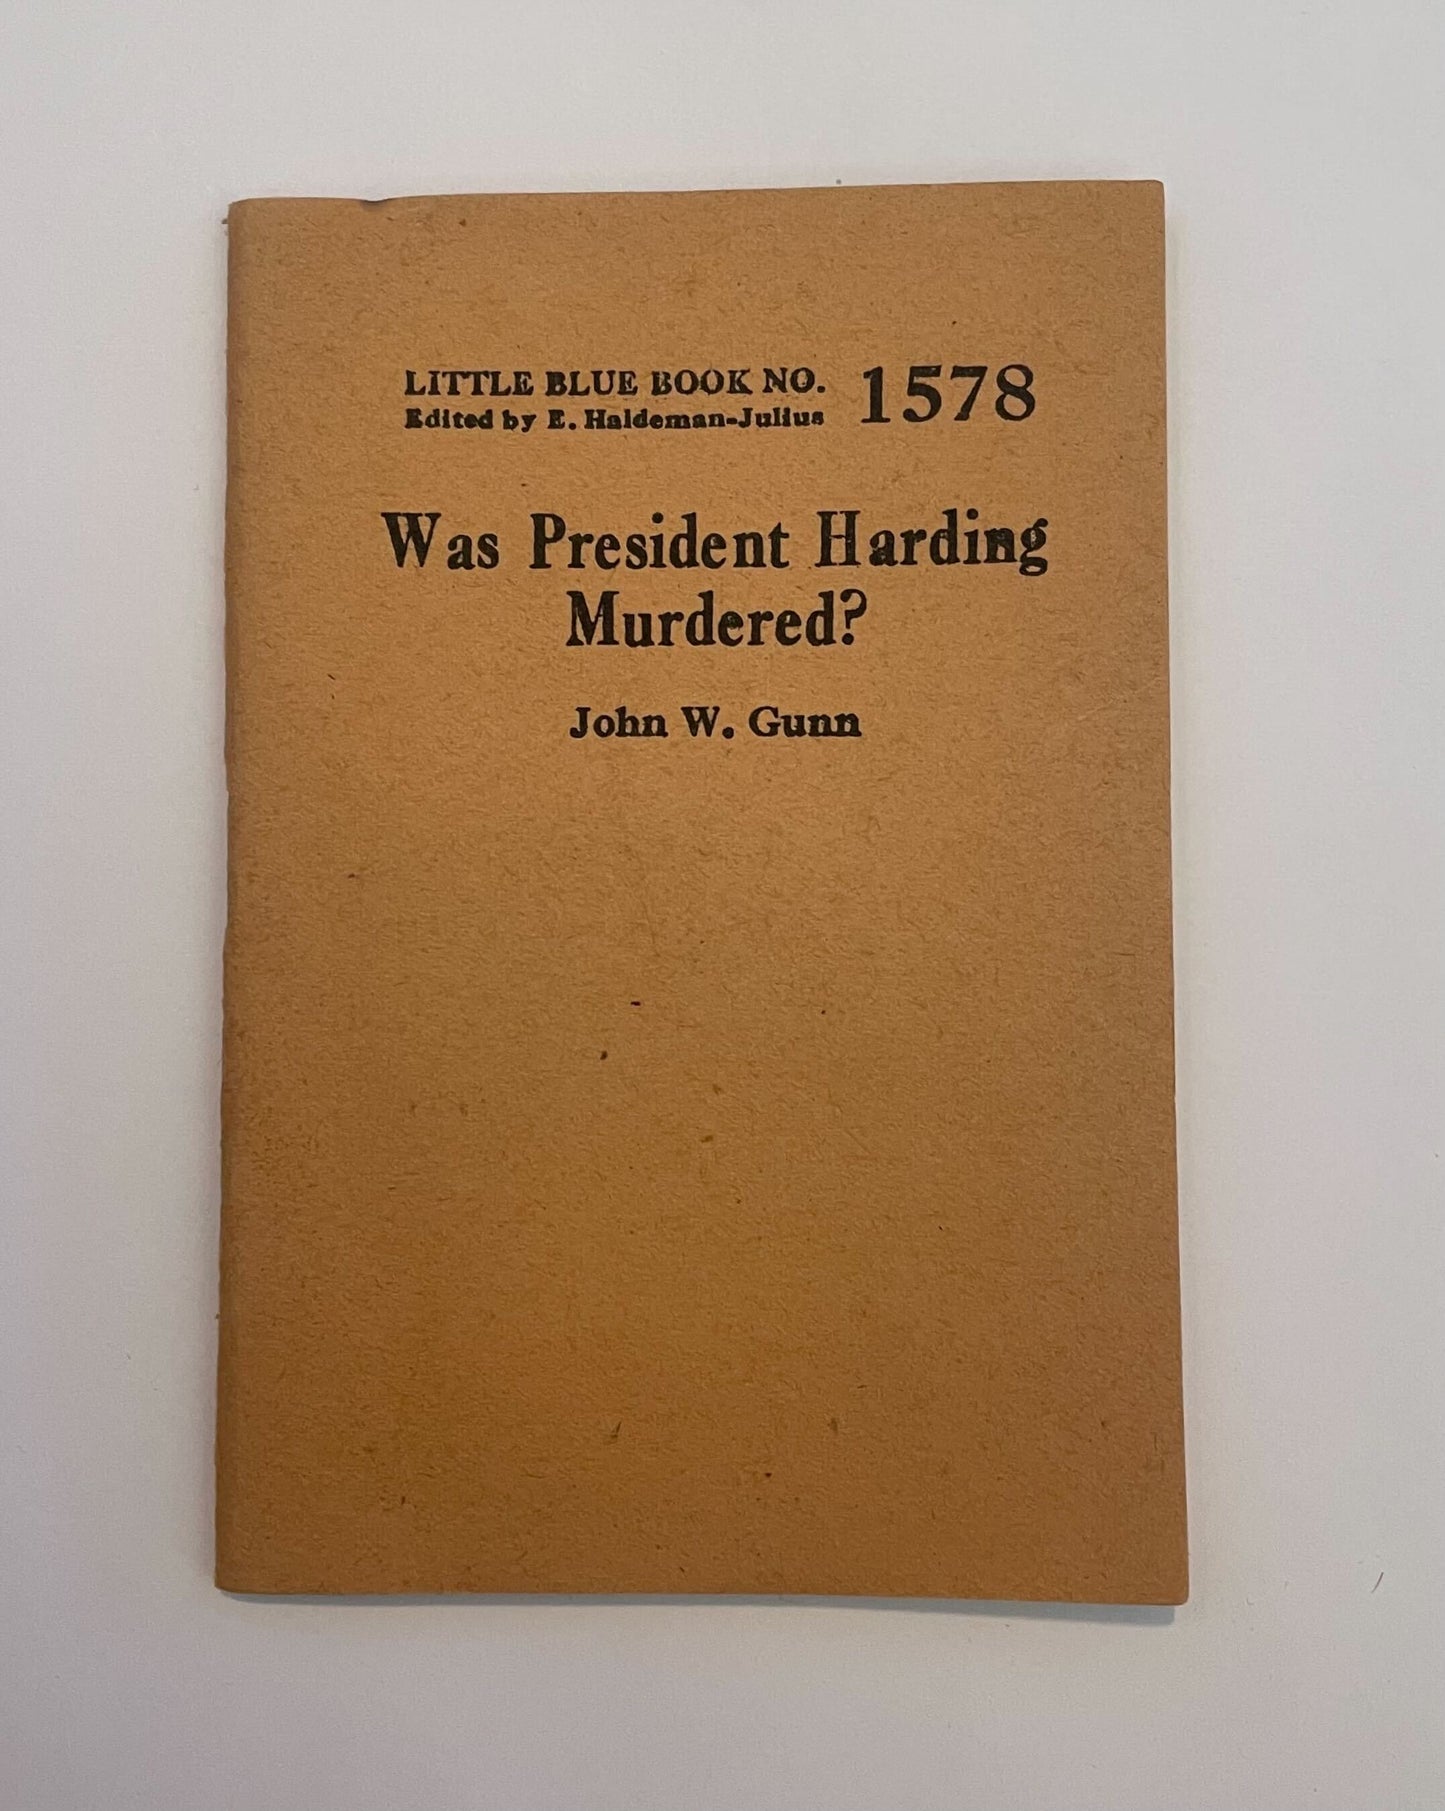 suspect pamphlets from the 1930's (Little Blue Book)